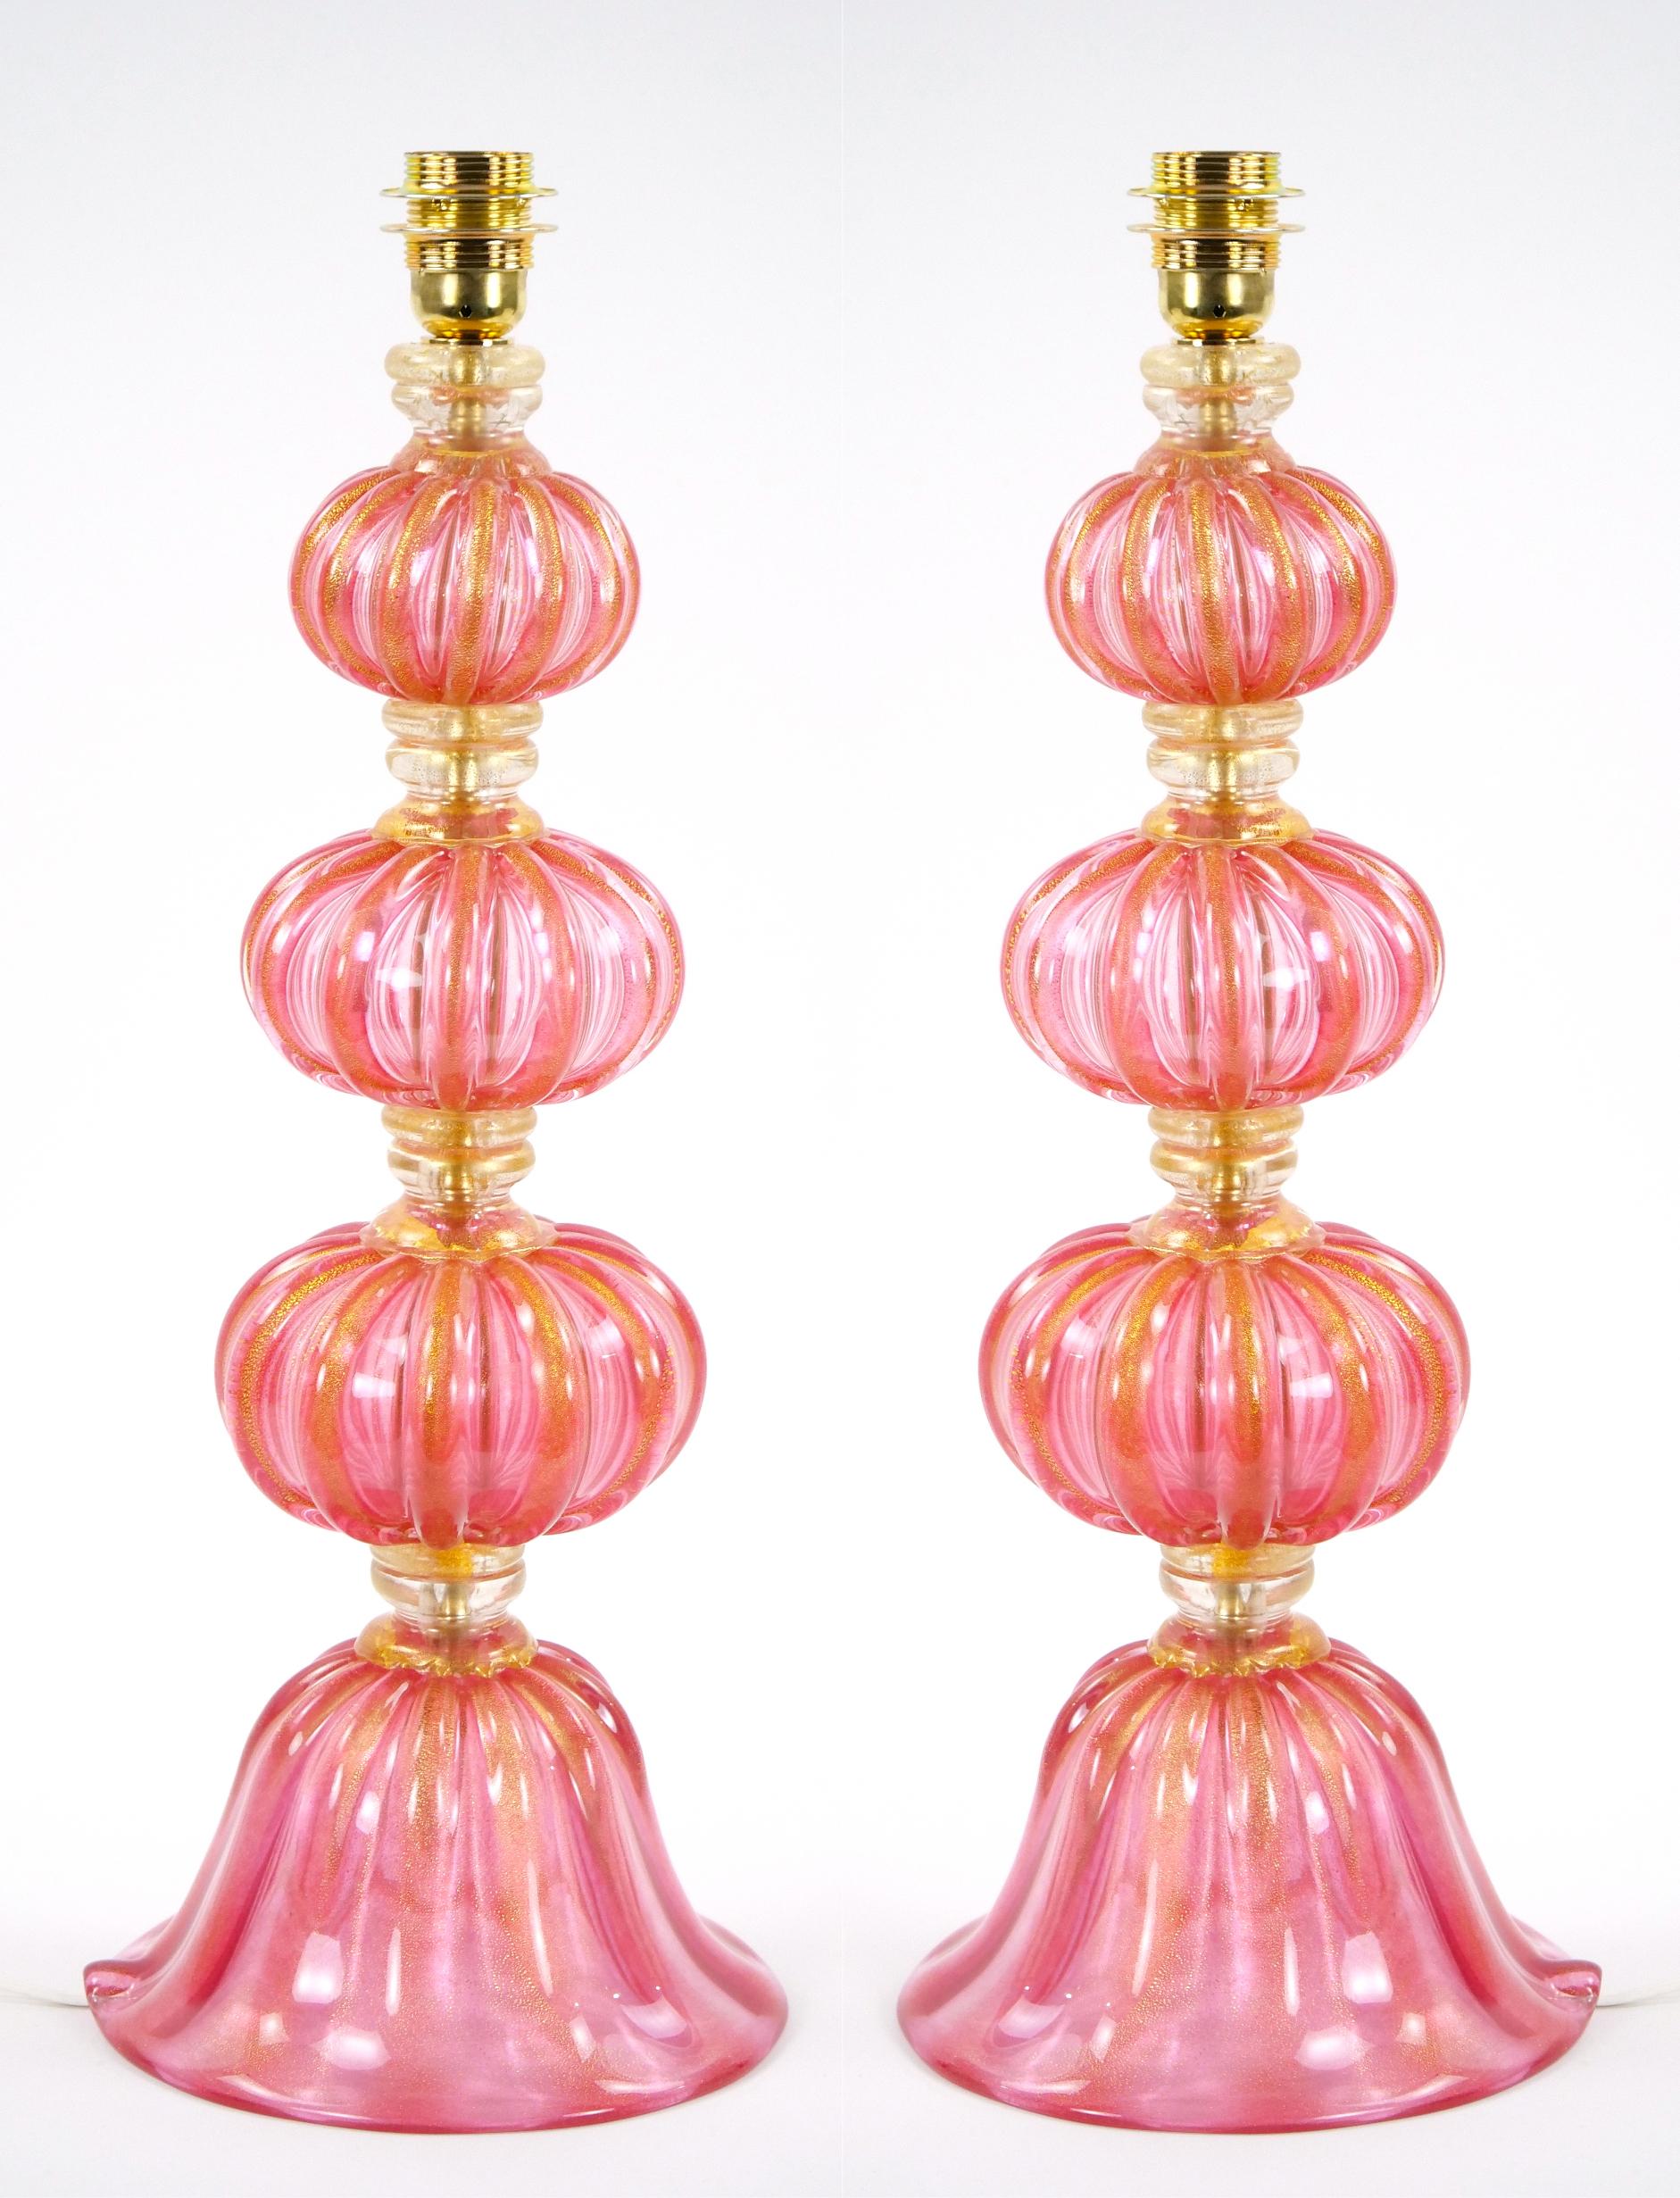 Enhance your interior décor with this exquisite pair of Venetian Murano glass table lamps, painstakingly handcrafted and mouth-blown to perfection. Each lamp features a captivating pink-colored glass base adorned with delicate gold flecks, imbuing